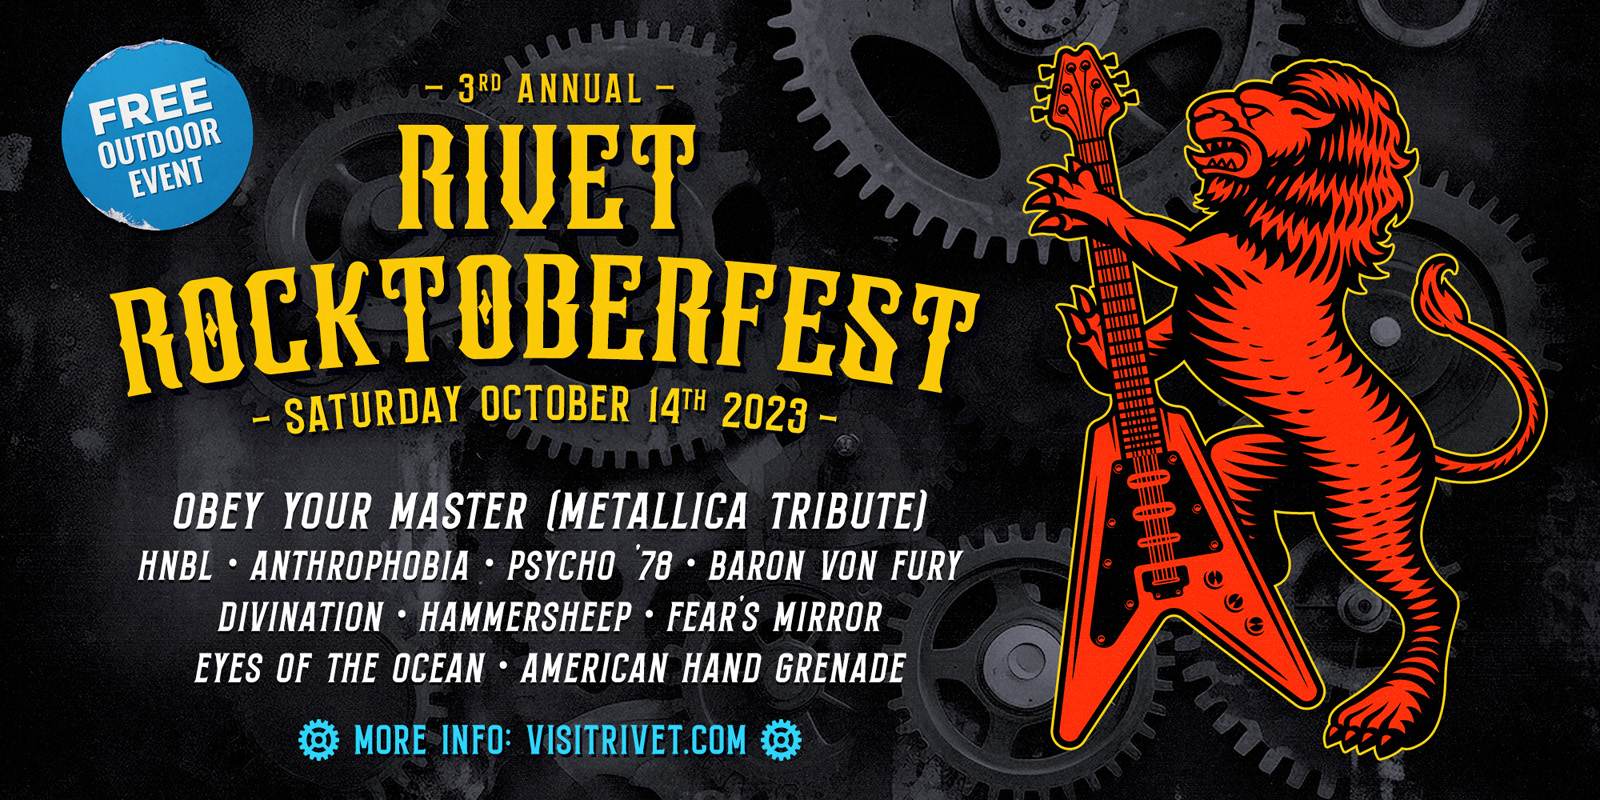 Rivet Rocktoberfest 3 at Rivet: Canteen & Assembly on Saturday, October 14th, 2023. The Outdoor Stage season finale with Obey Your Master (Metallica Tribute), HNBL, Anthrophobia, Psycho '78, Baron Von Fury, Divination, Hammersheep, Fear's Mirror, Eyes of the Ocean, and American Hand Grenade.